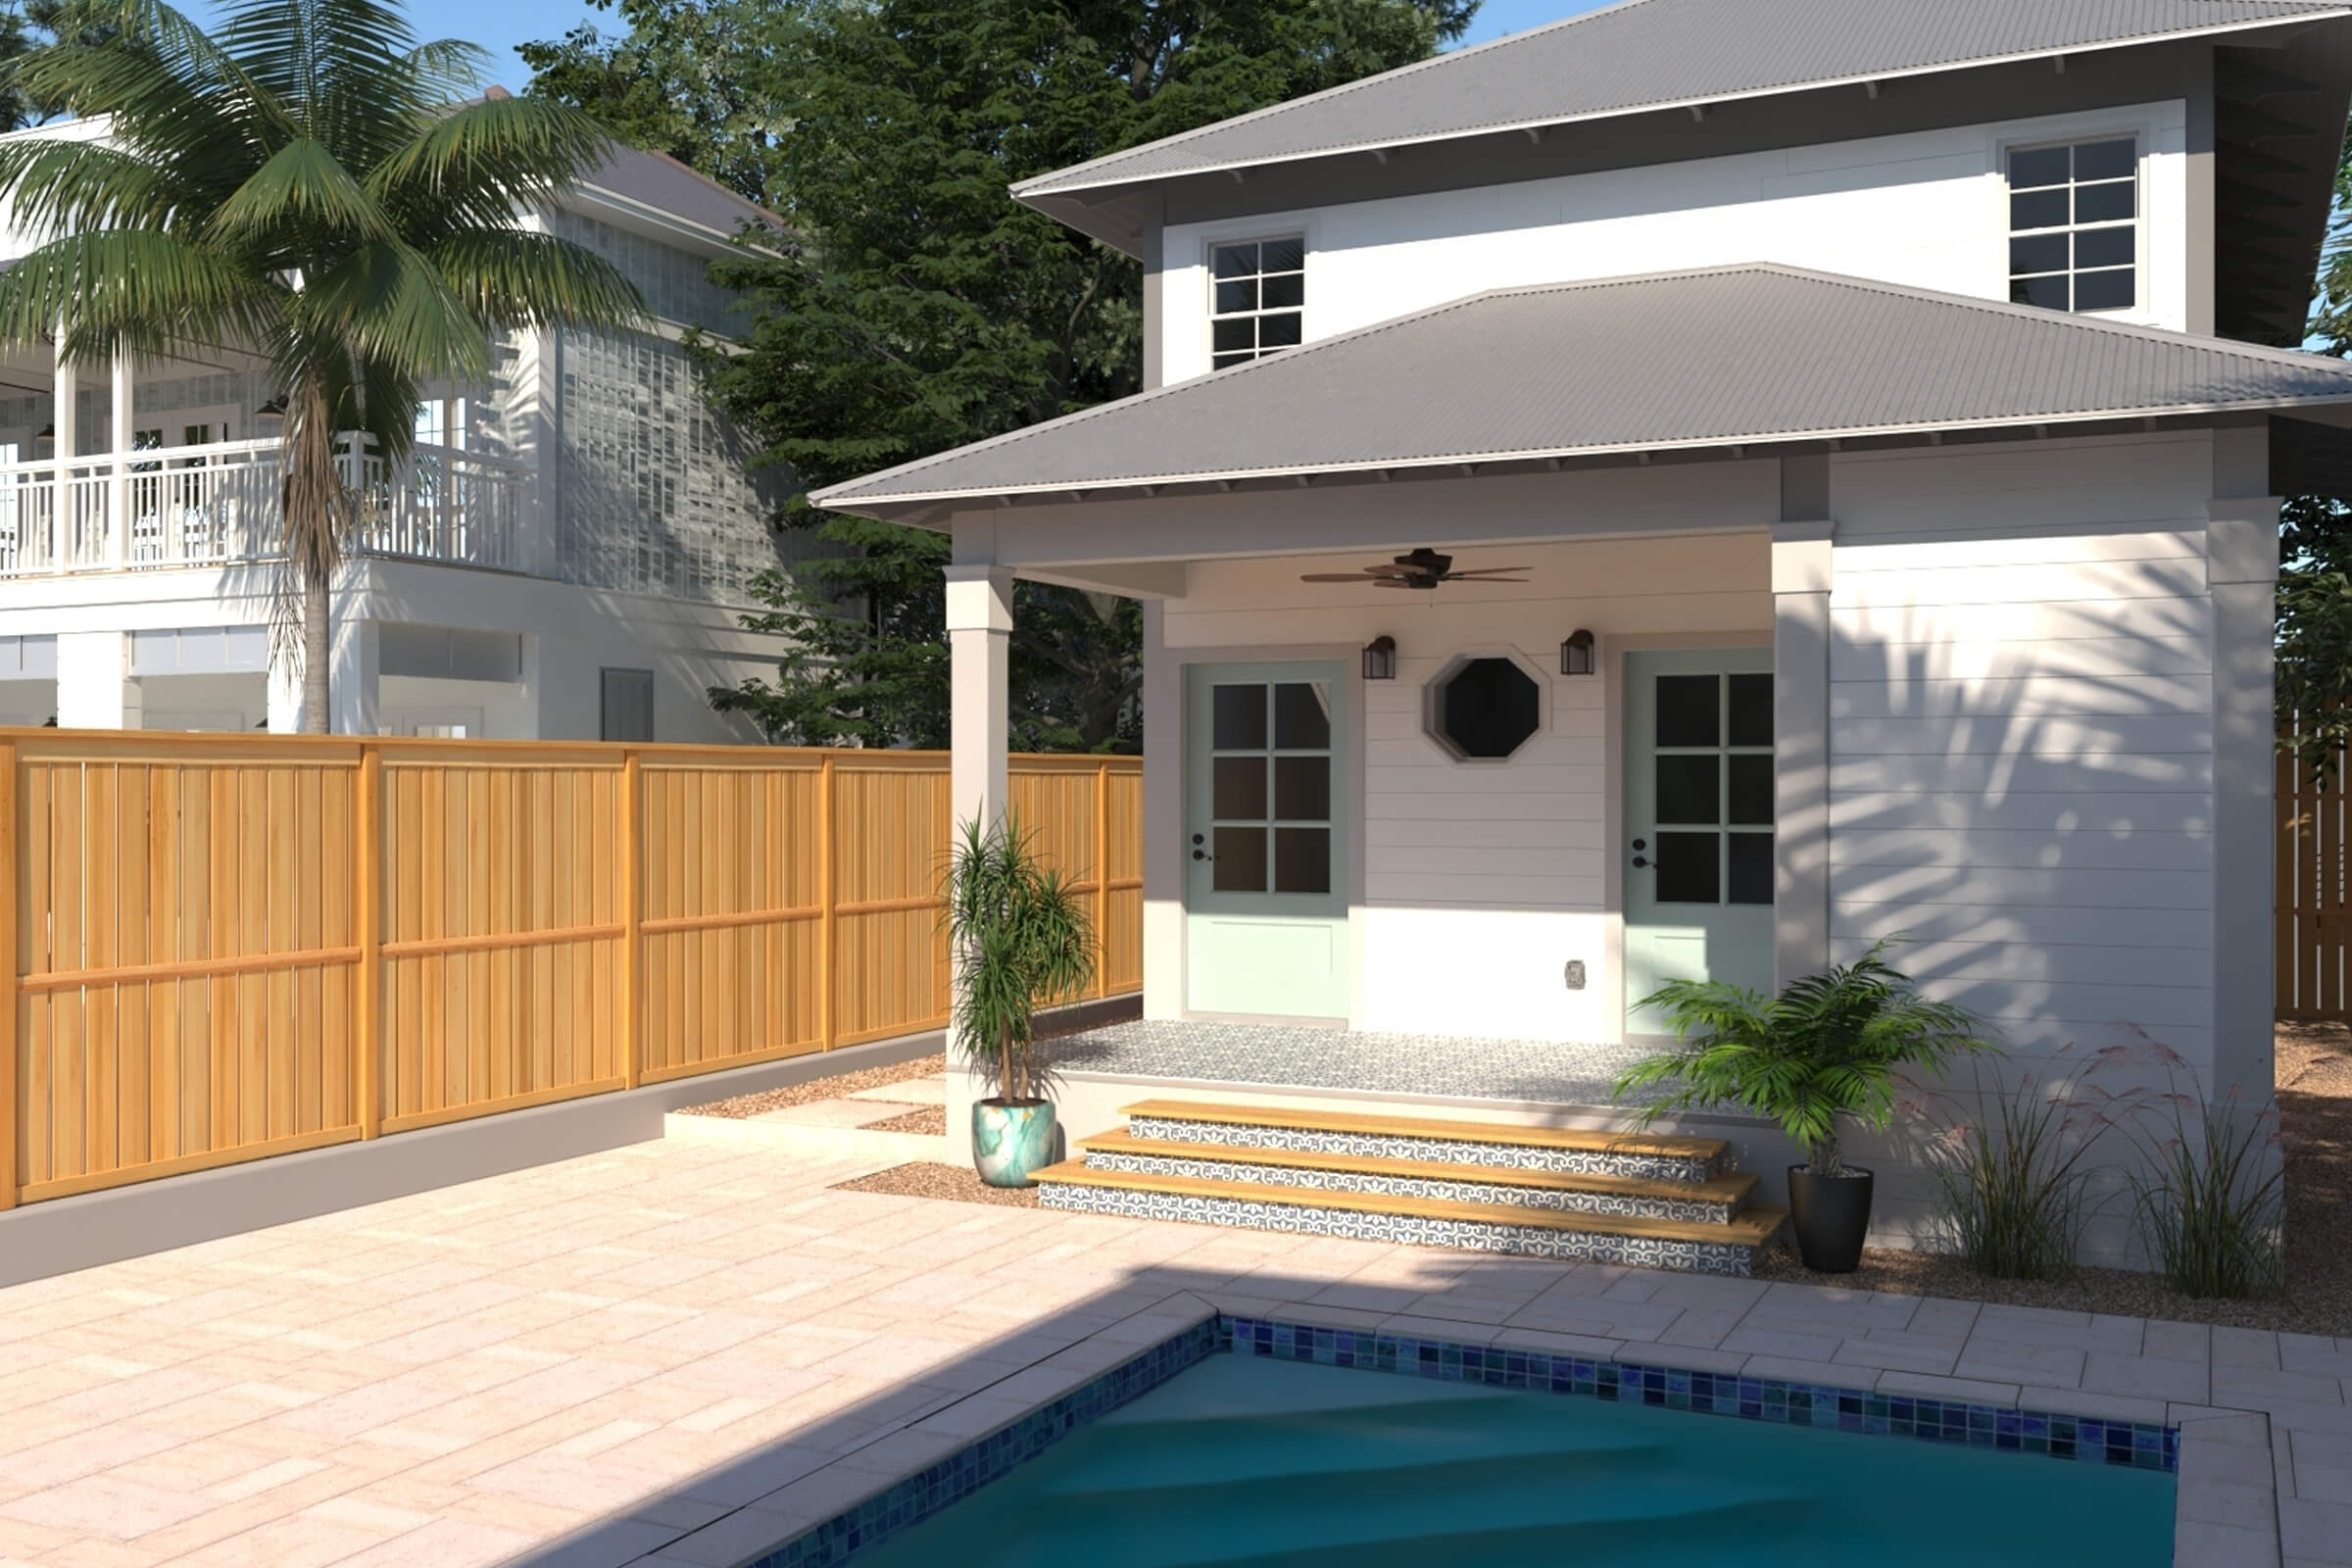 Product 3D Rendering Services | House Of Blue Beans